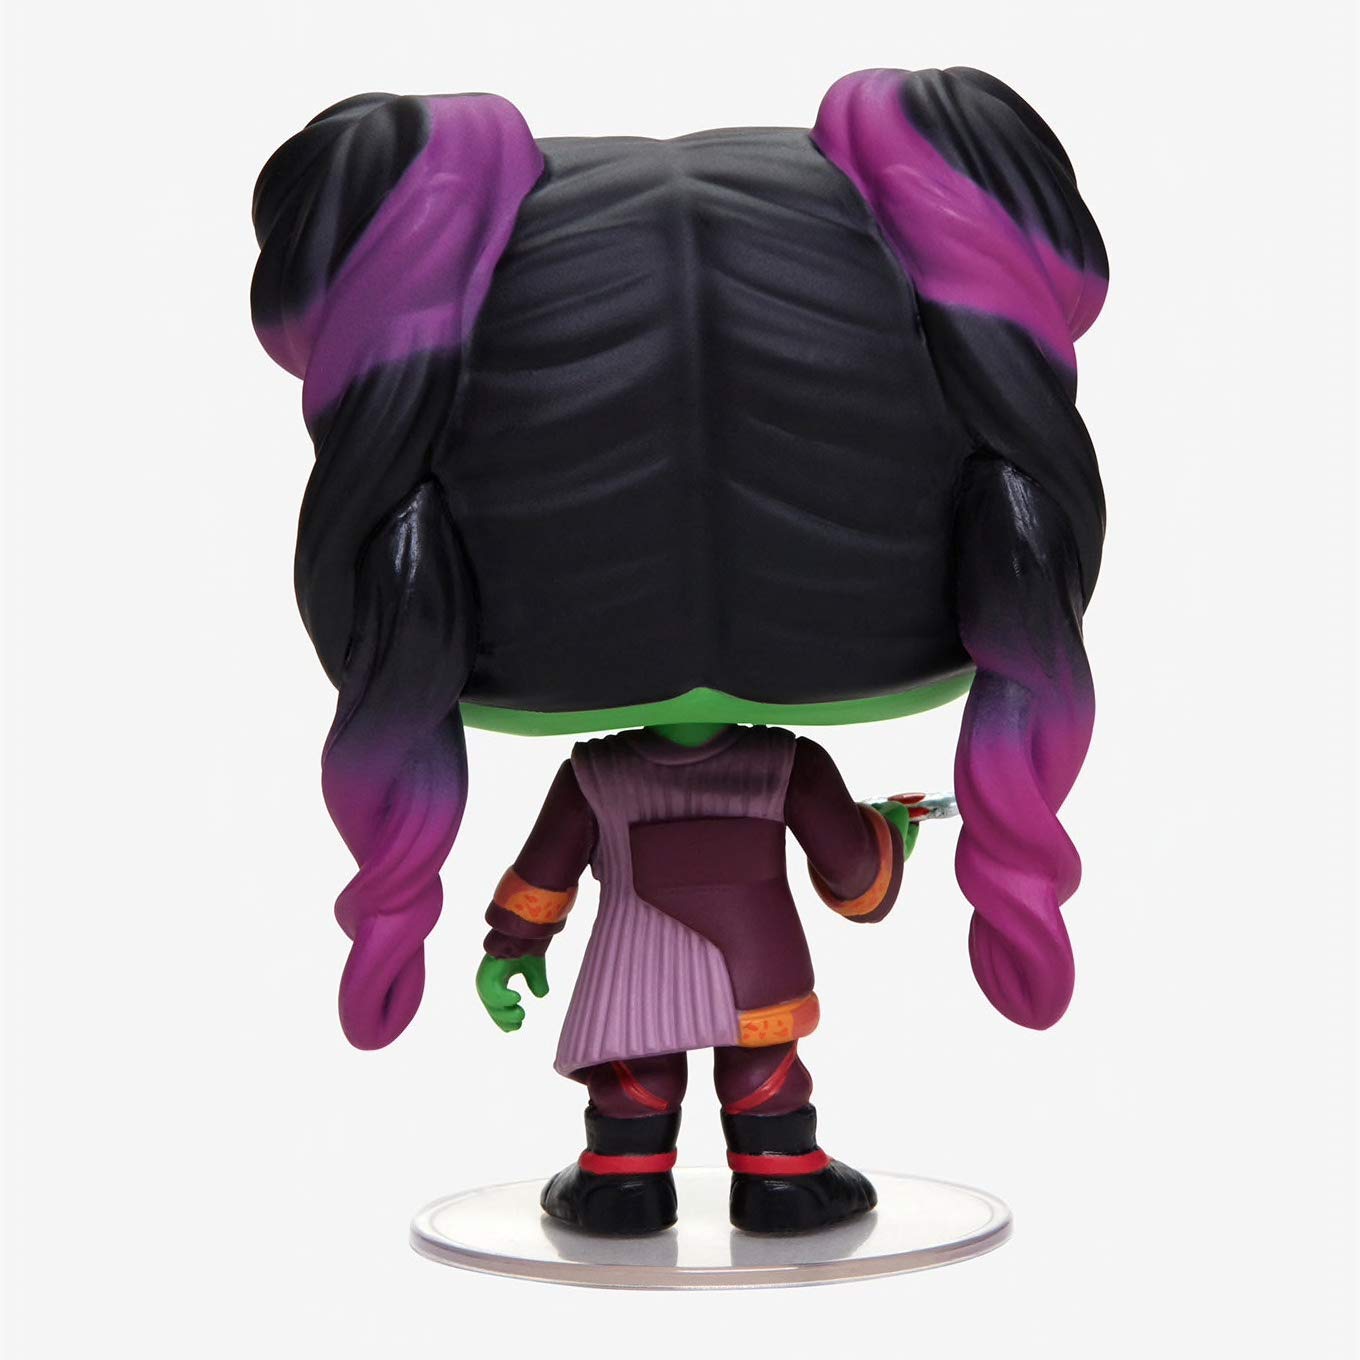 Funko Pop! Marvel: Avengers Infinity War - Young Gamora with Dagger, Standard Toy, Multicolor